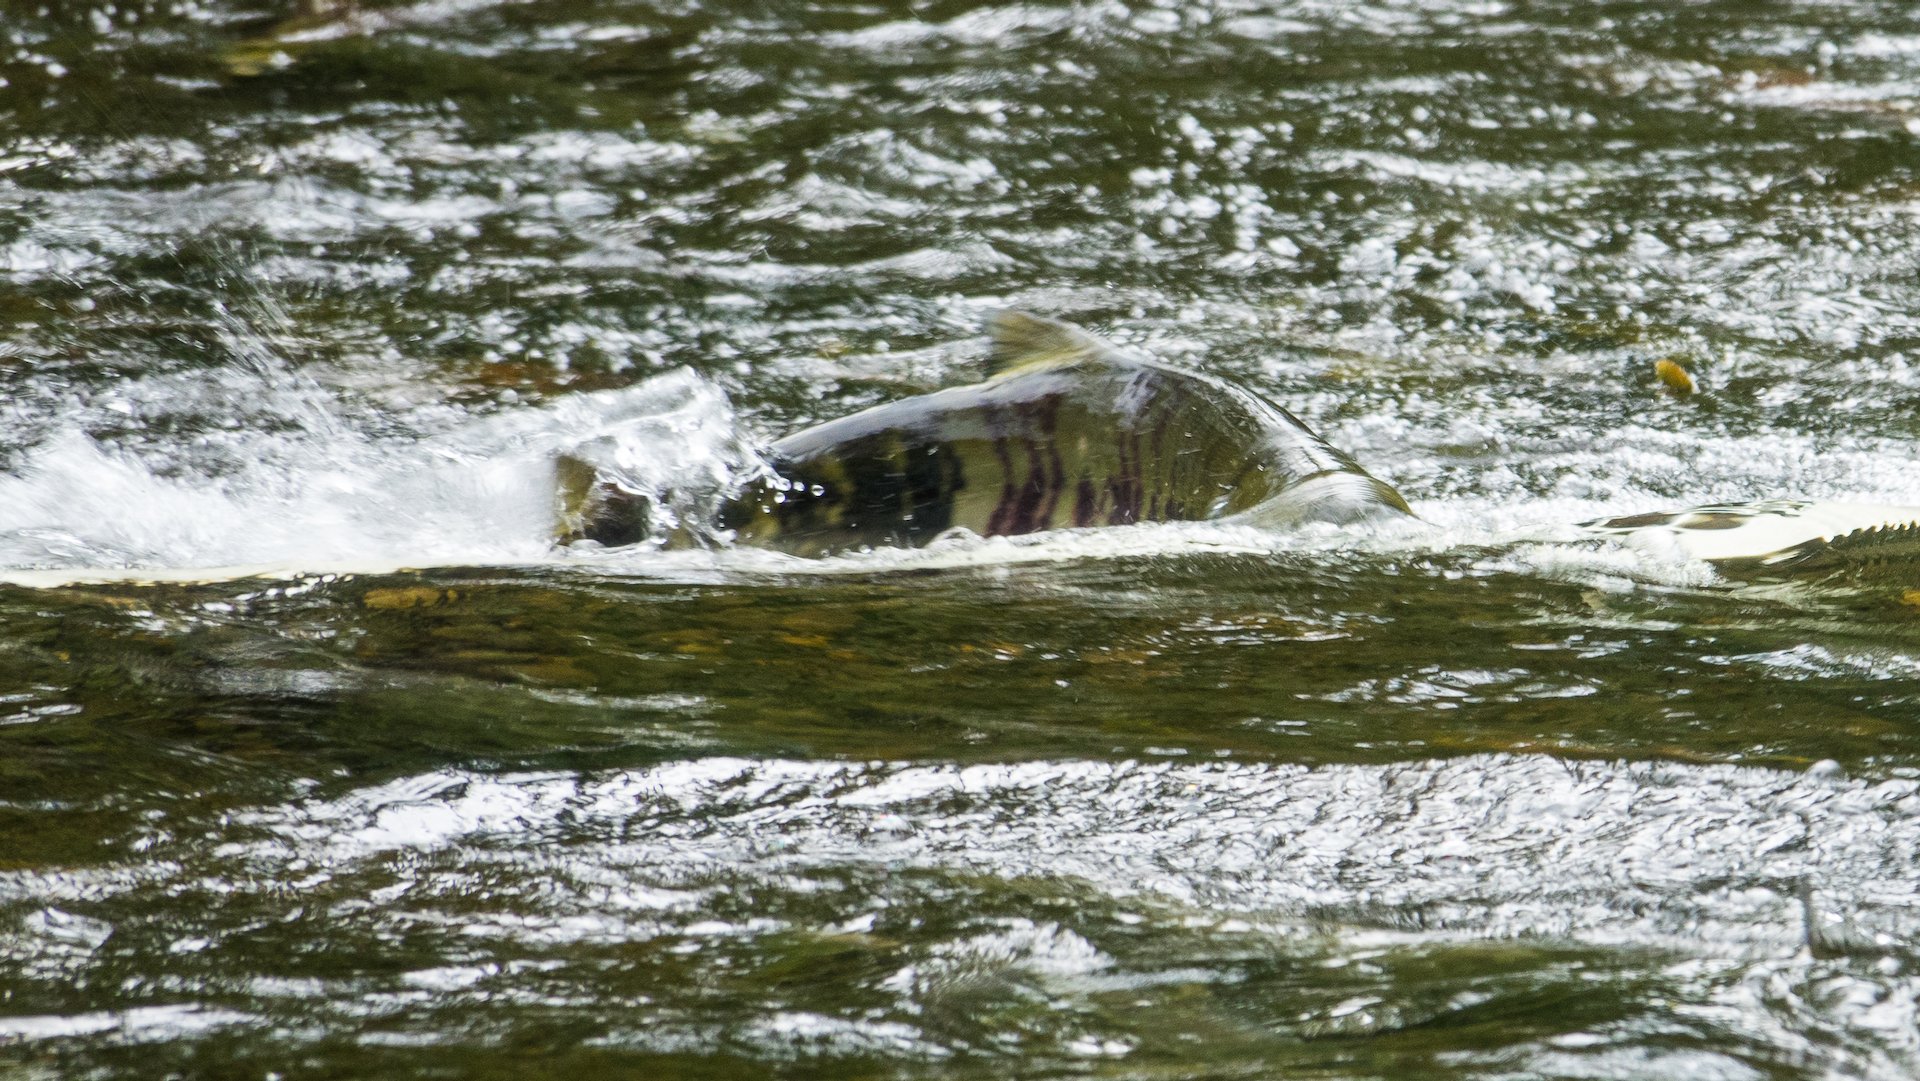 A big salmon trying to get up and over one of the dividers.